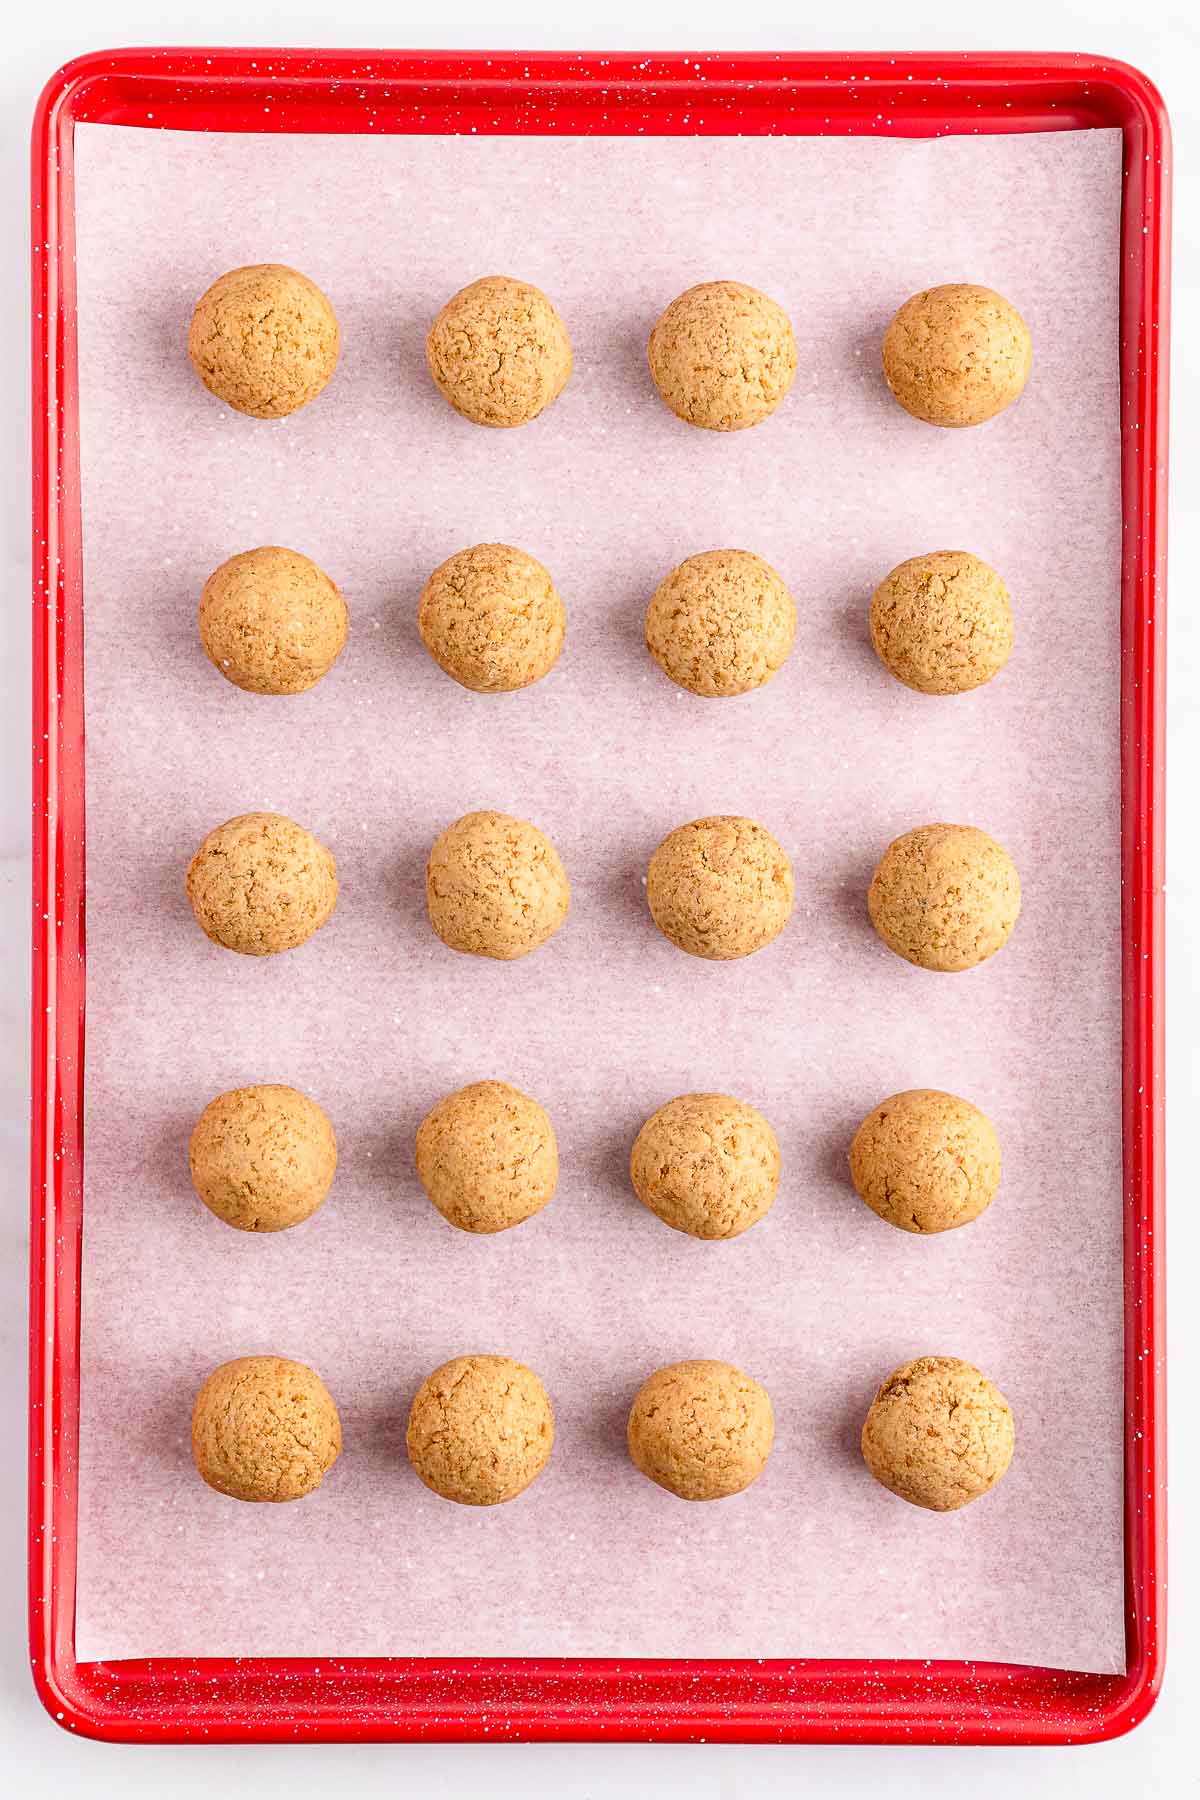 A tray of gingerbread truffle balls lined up.